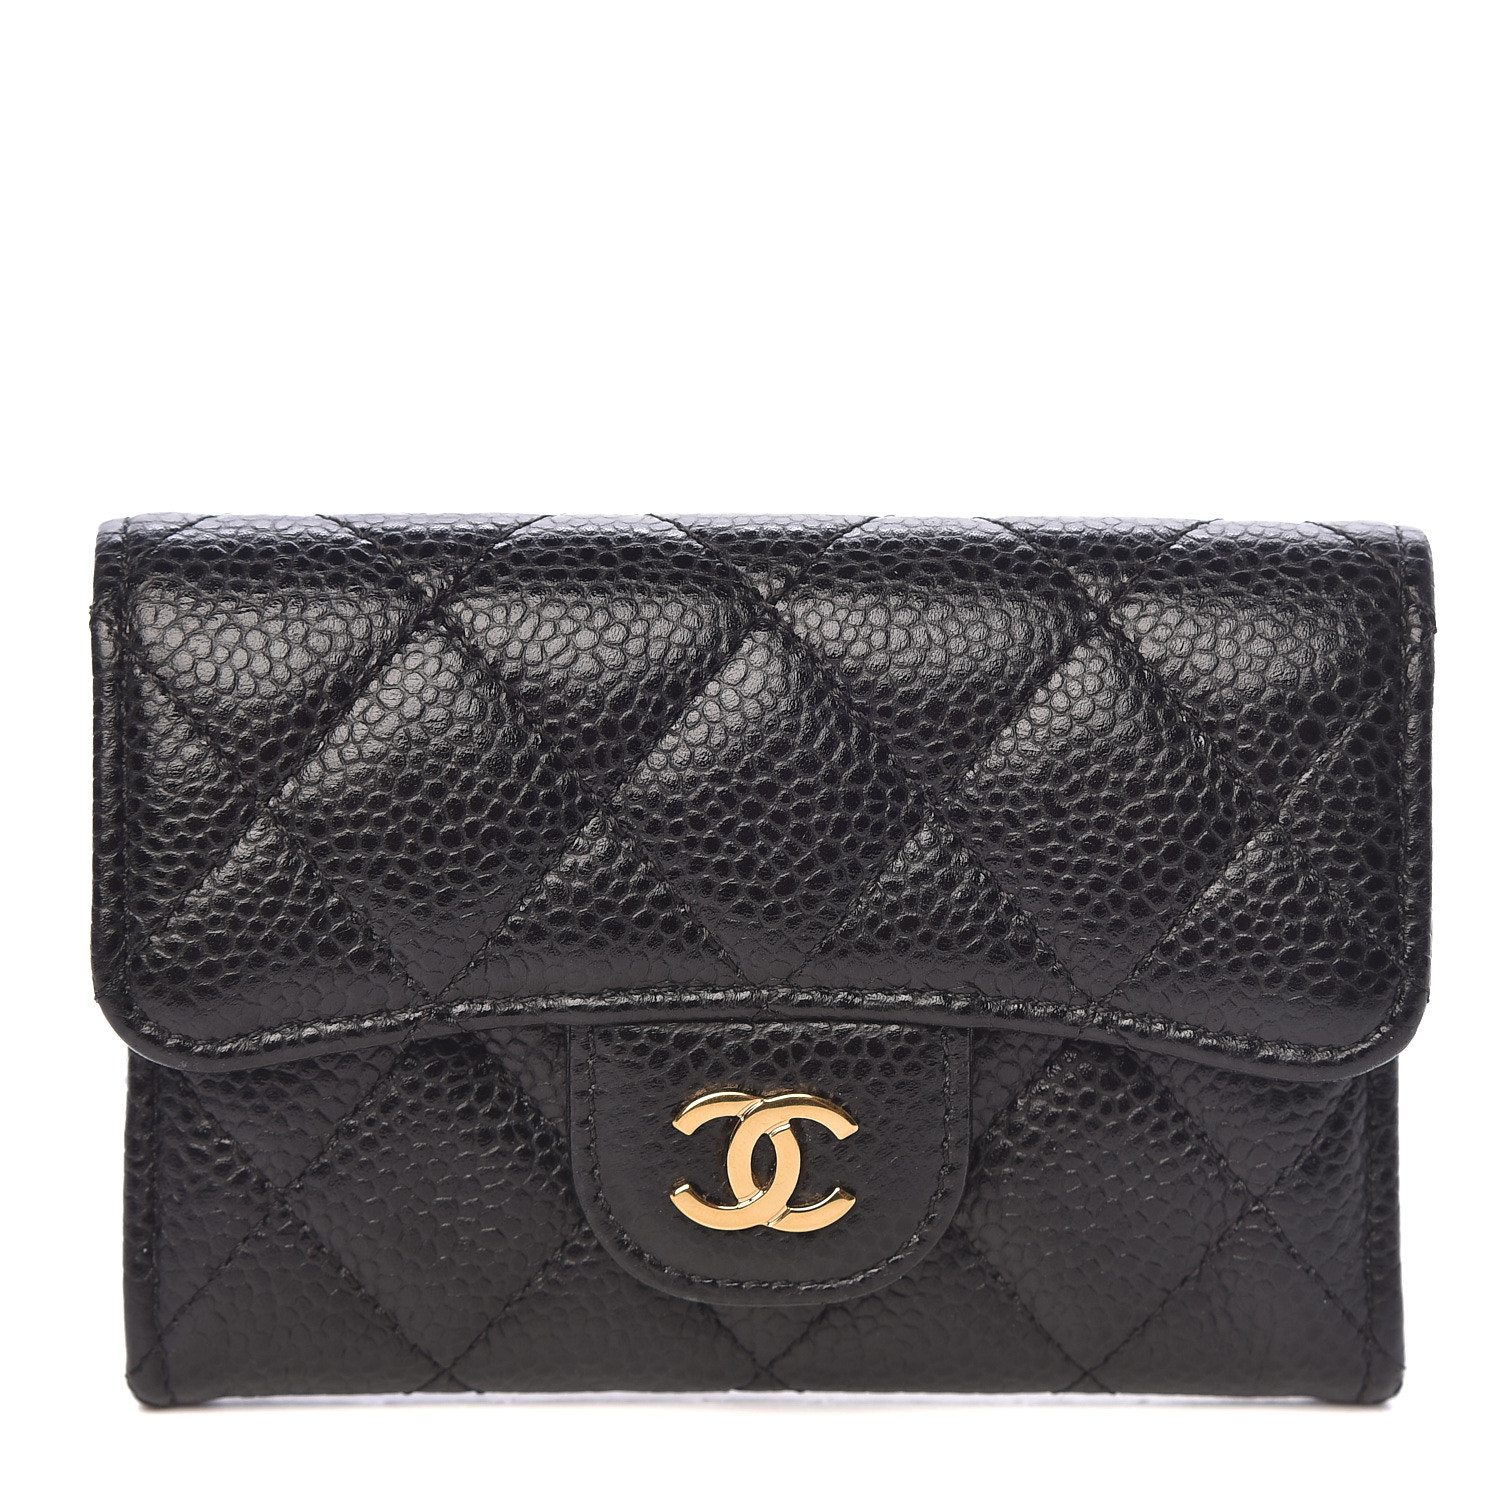 CHANEL Caviar Quilted Flap Card Holder Black 470892 | FASHIONPHILE